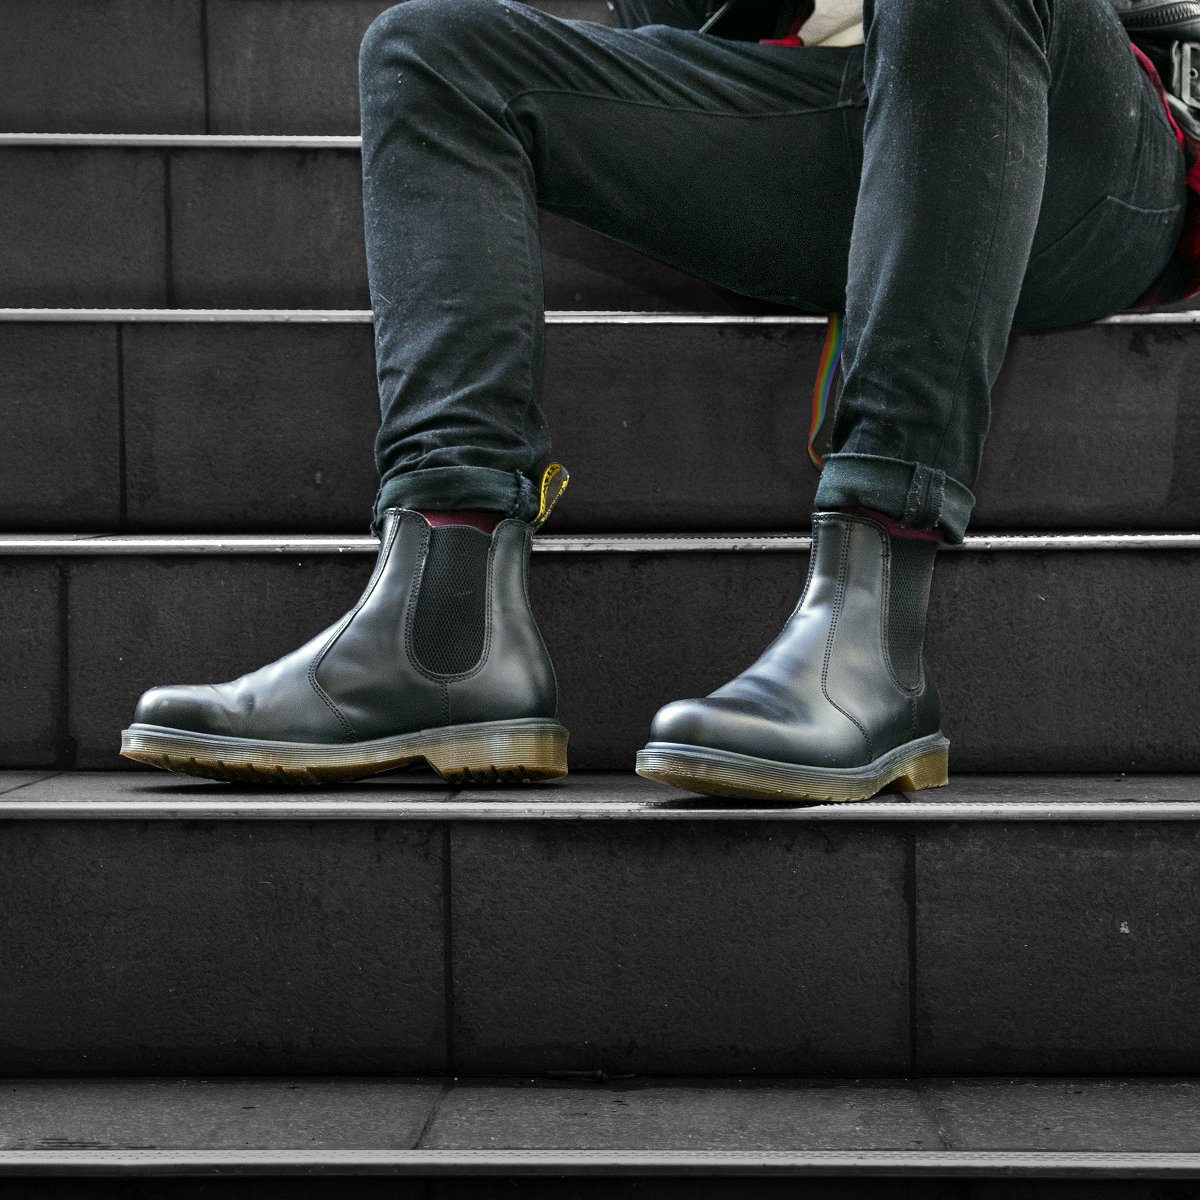 hamburger Badeværelse fodbold Dr. Martens ar Twitter: "The 2976 Chelsea Boot. One of our Originals, the  2976 features Docs attitude, a tough sole and our iconic yellow stitch.  Link in bio. EU: https://t.co/JHIUpC9a3O US &